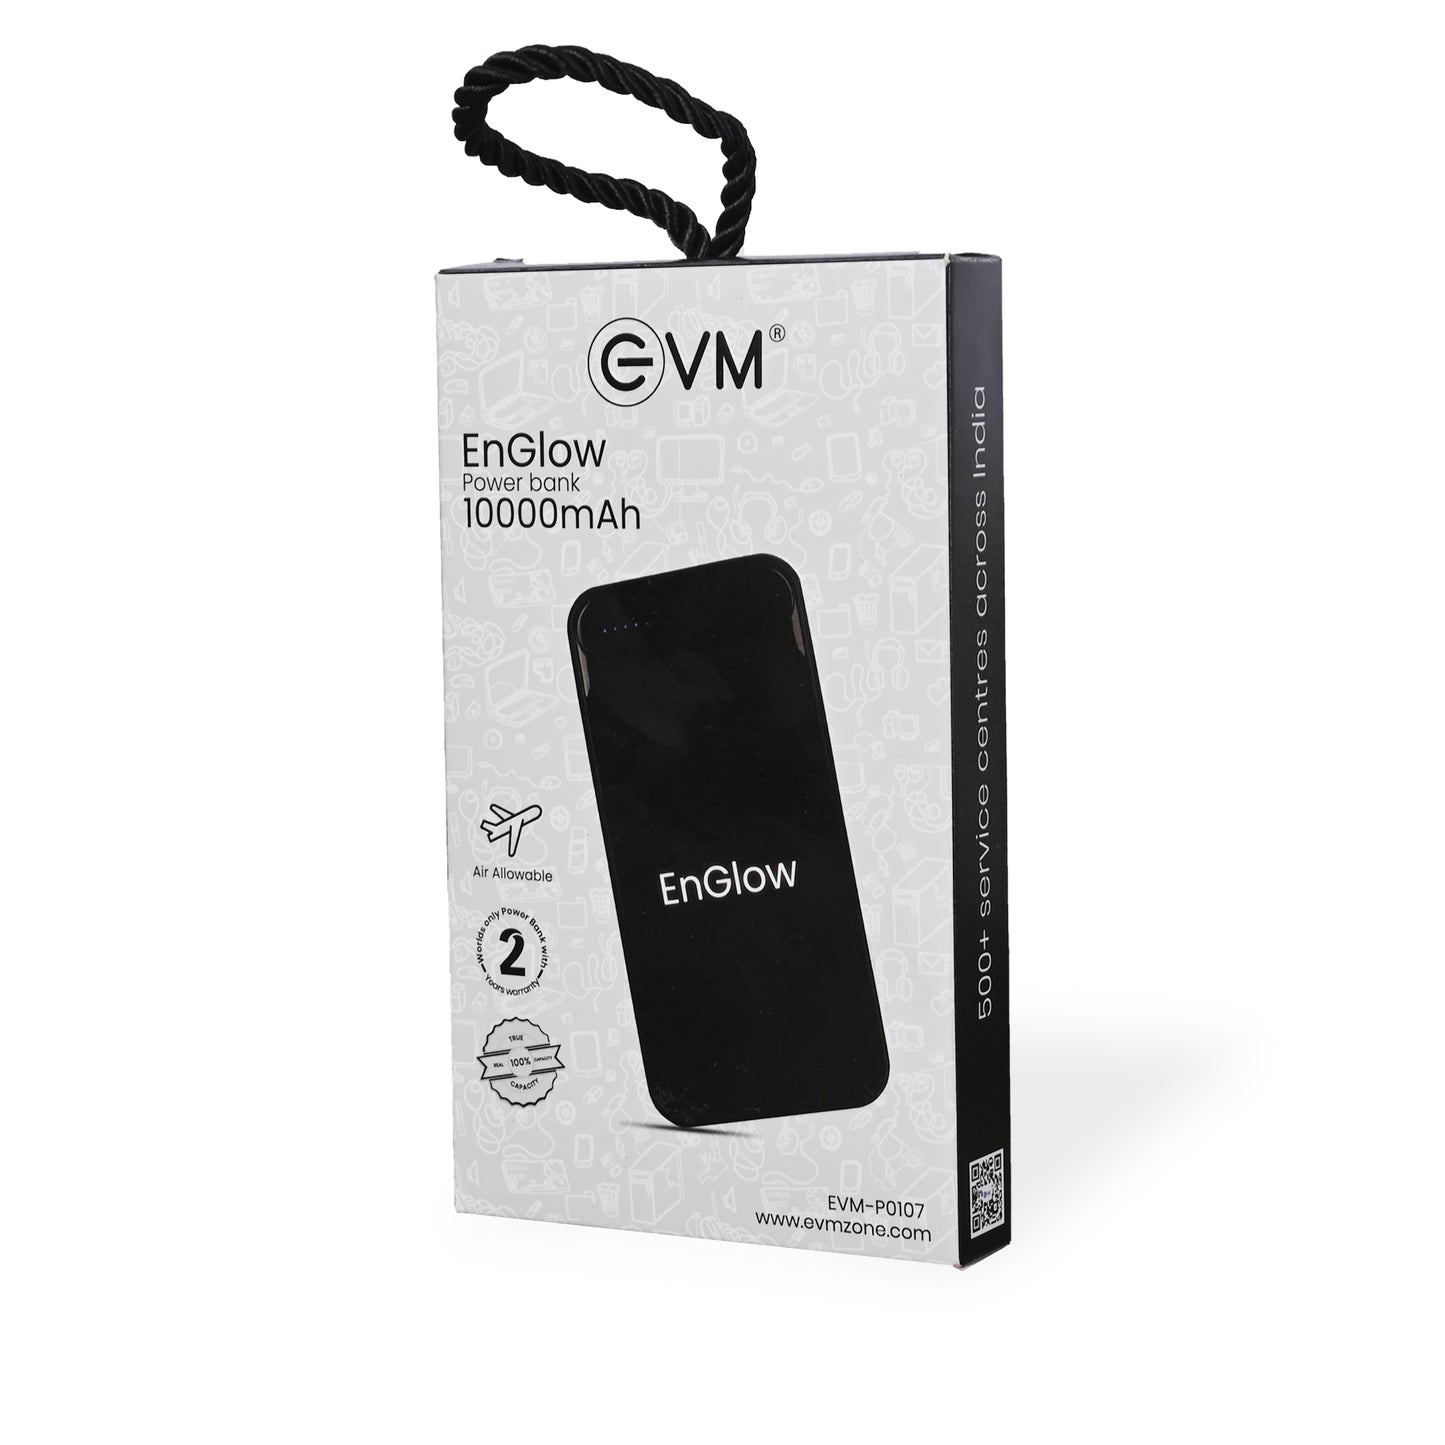 Personalized 10000mAh Logo Glow Power Bank - For Corporate Gifting, Event Gifting, Freebies, Promotions - HKEnglow